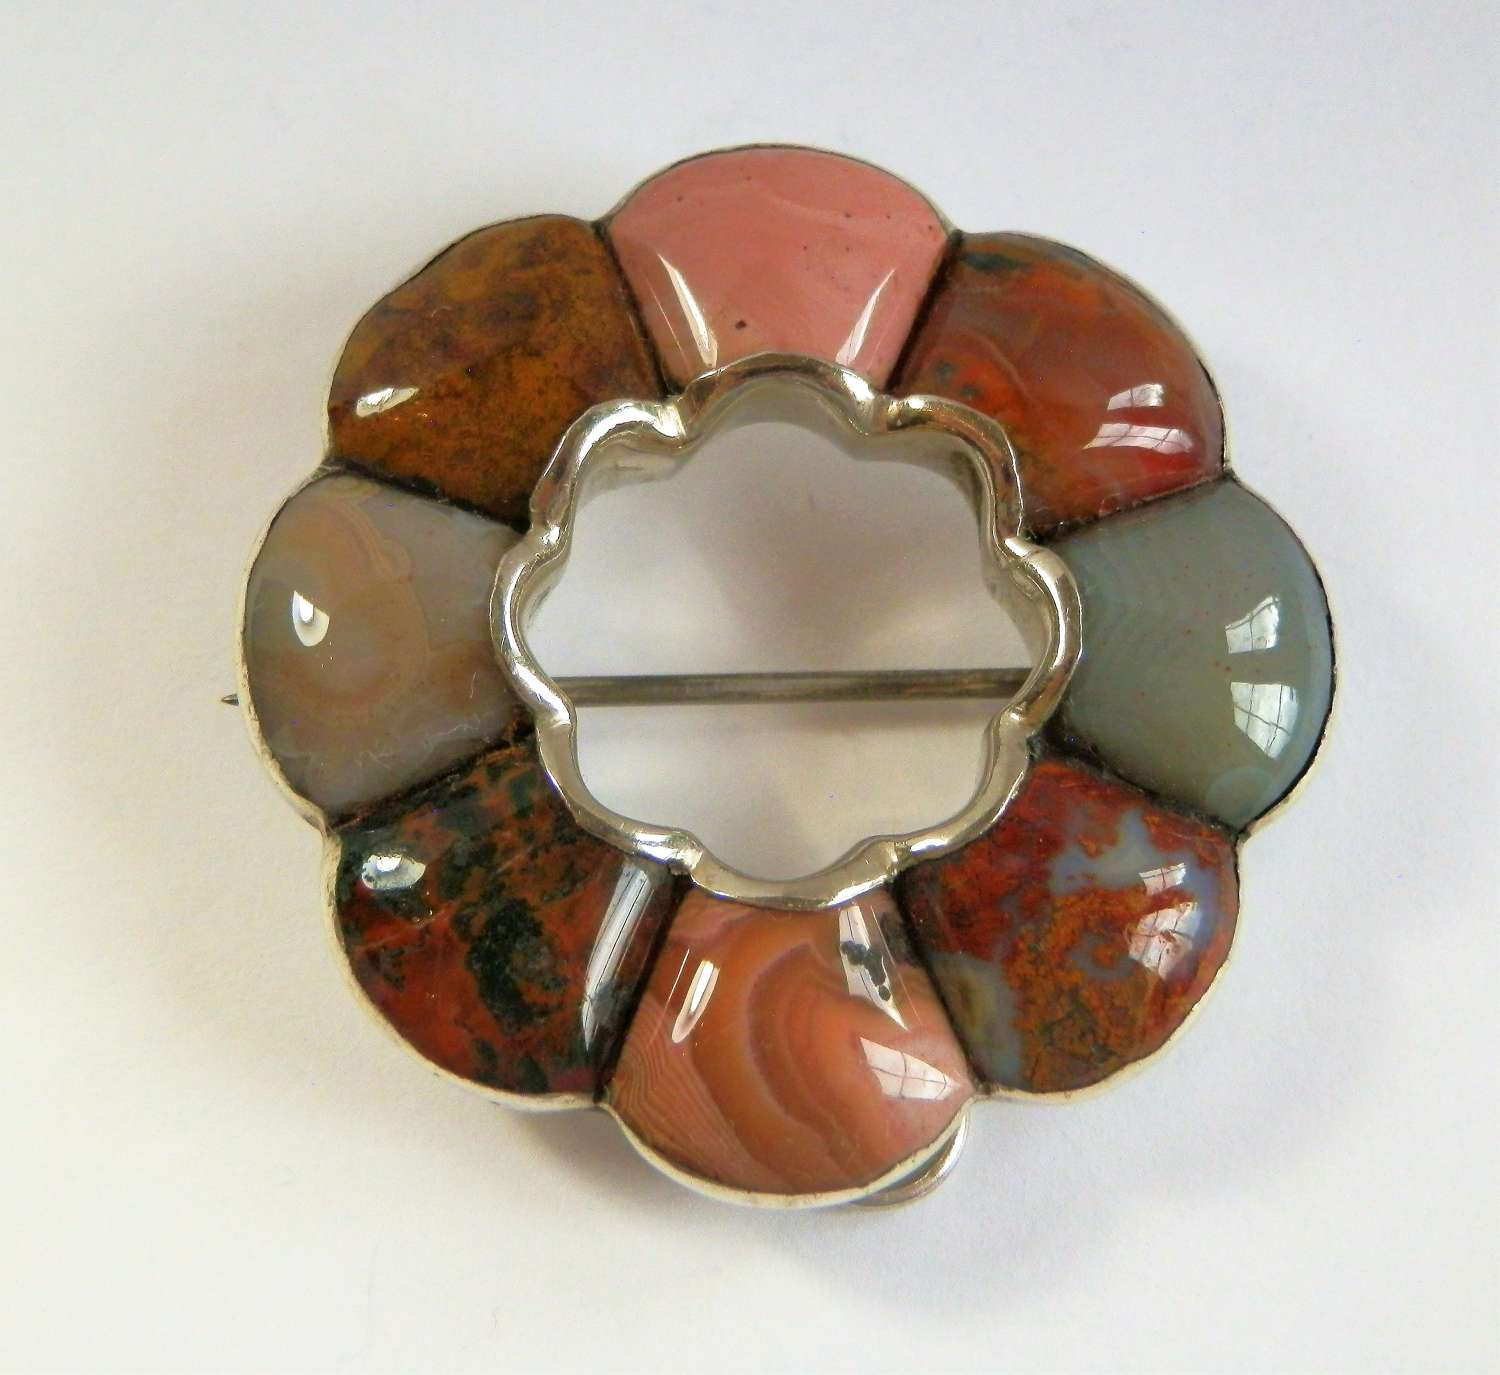 Victorian Scottish silver and agate brooch, c.1880